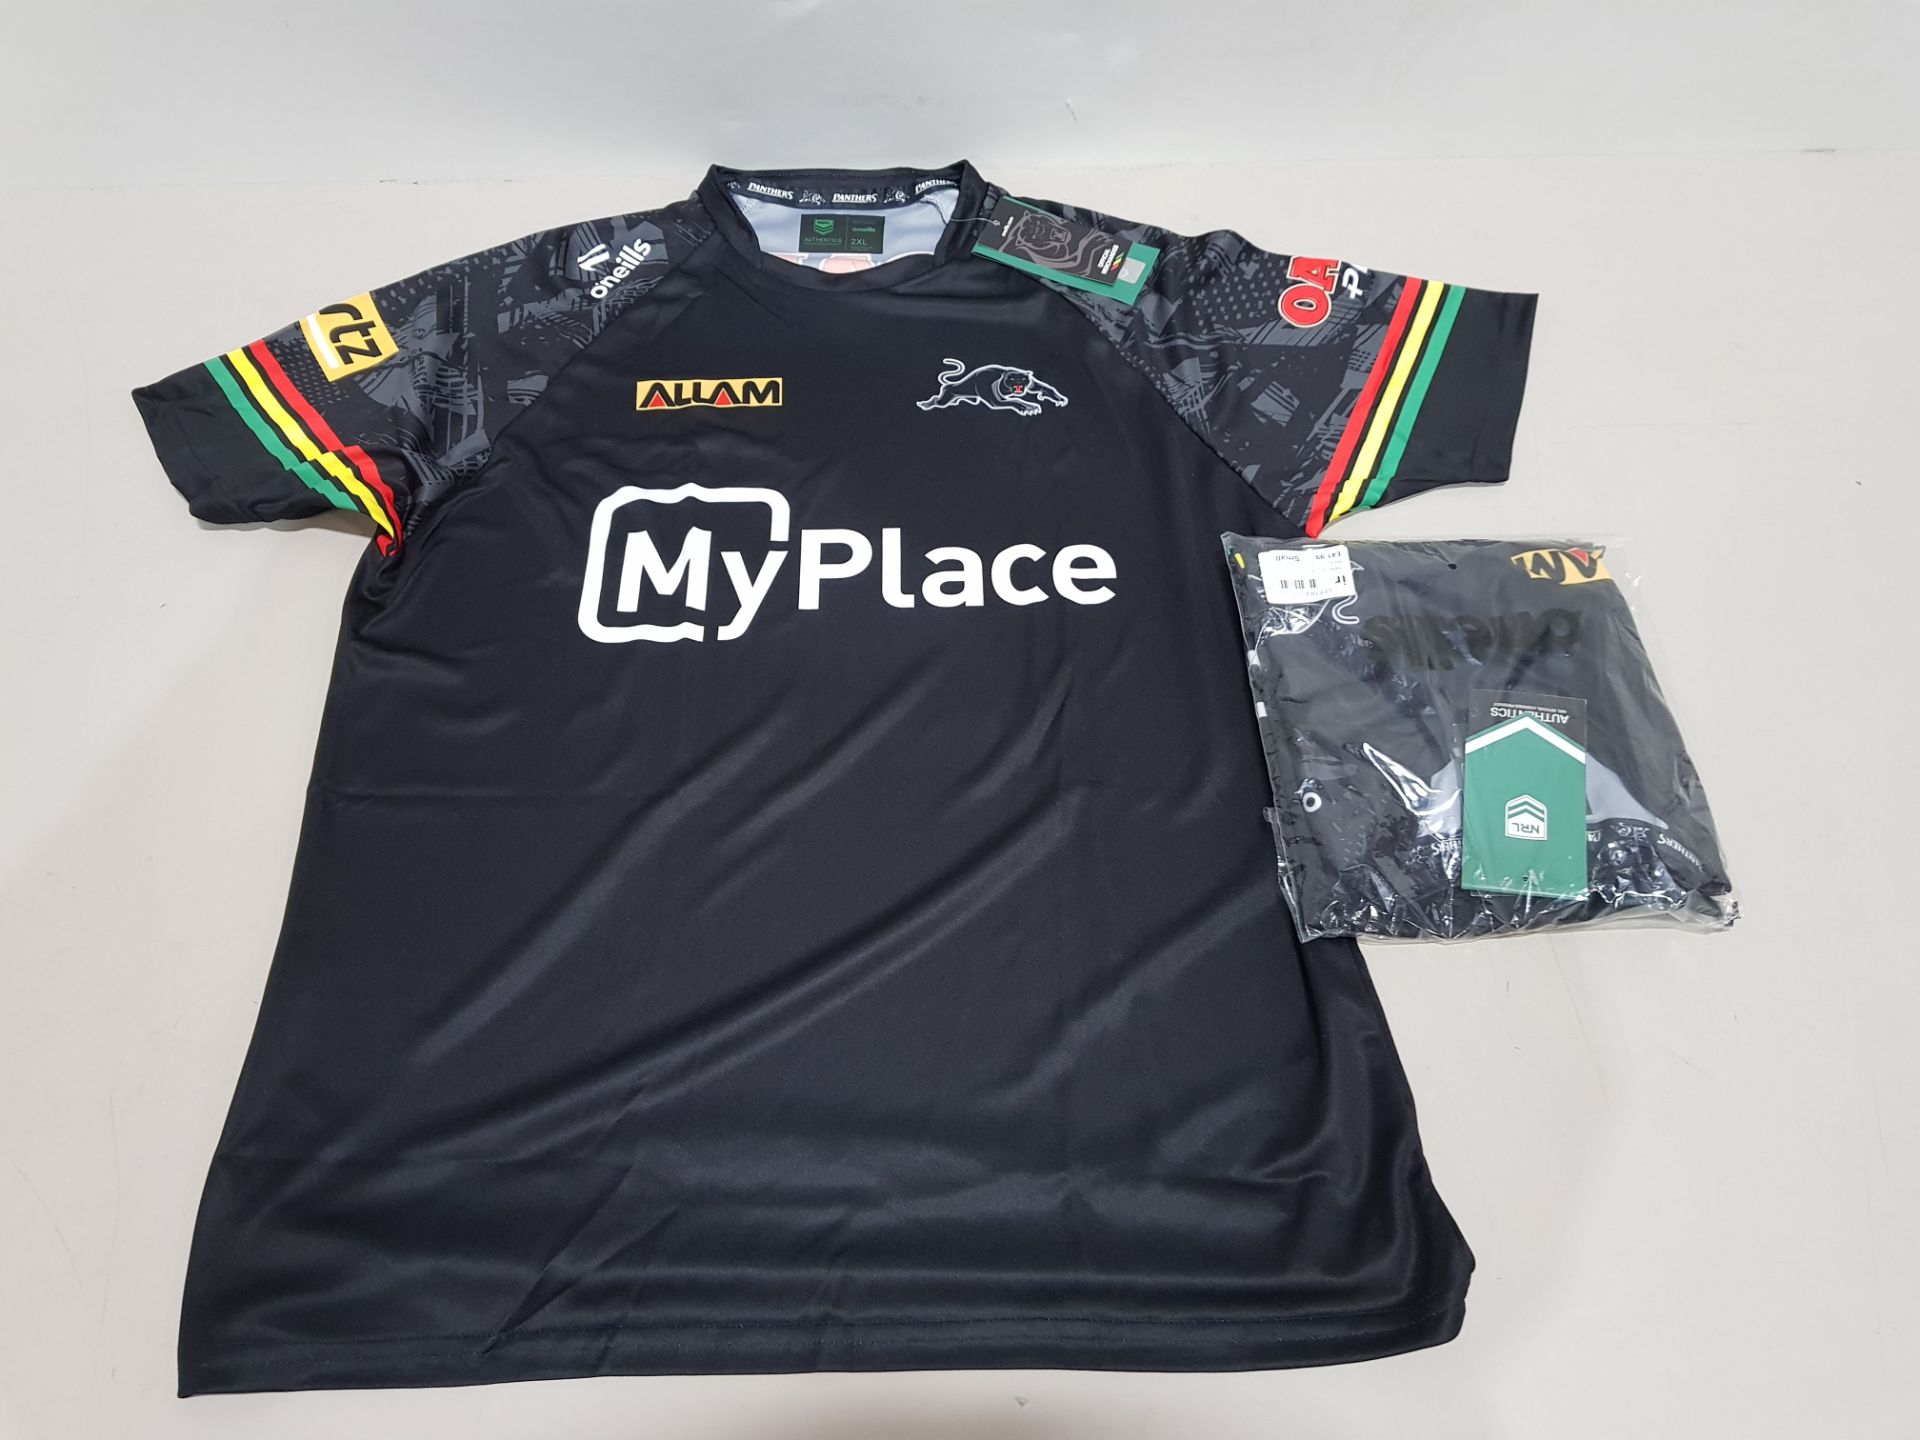 10 X BRAND NEW ONEILLS OFFICIAL MERCHANDISE NRL PANTHERS RUGBY SHIRTS IN BLACK IN VARIOUS SIZES £